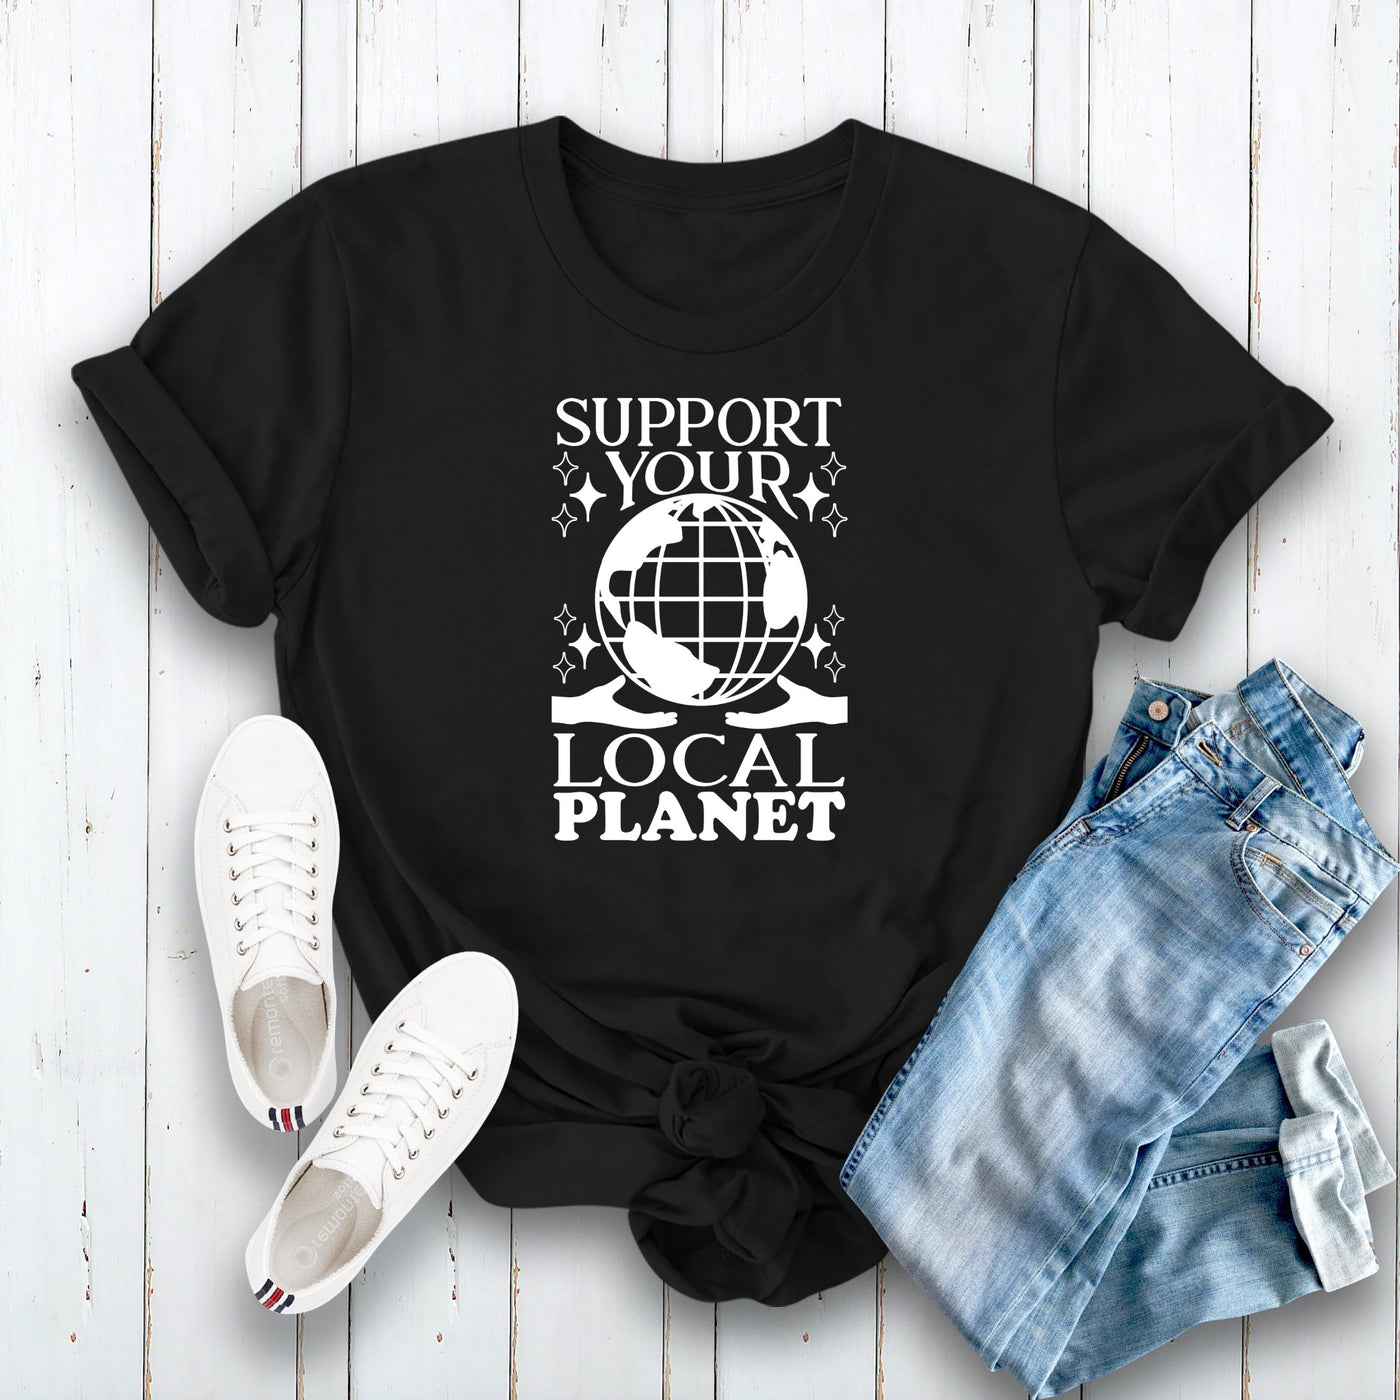 Support Your Local Planet T-Shirt